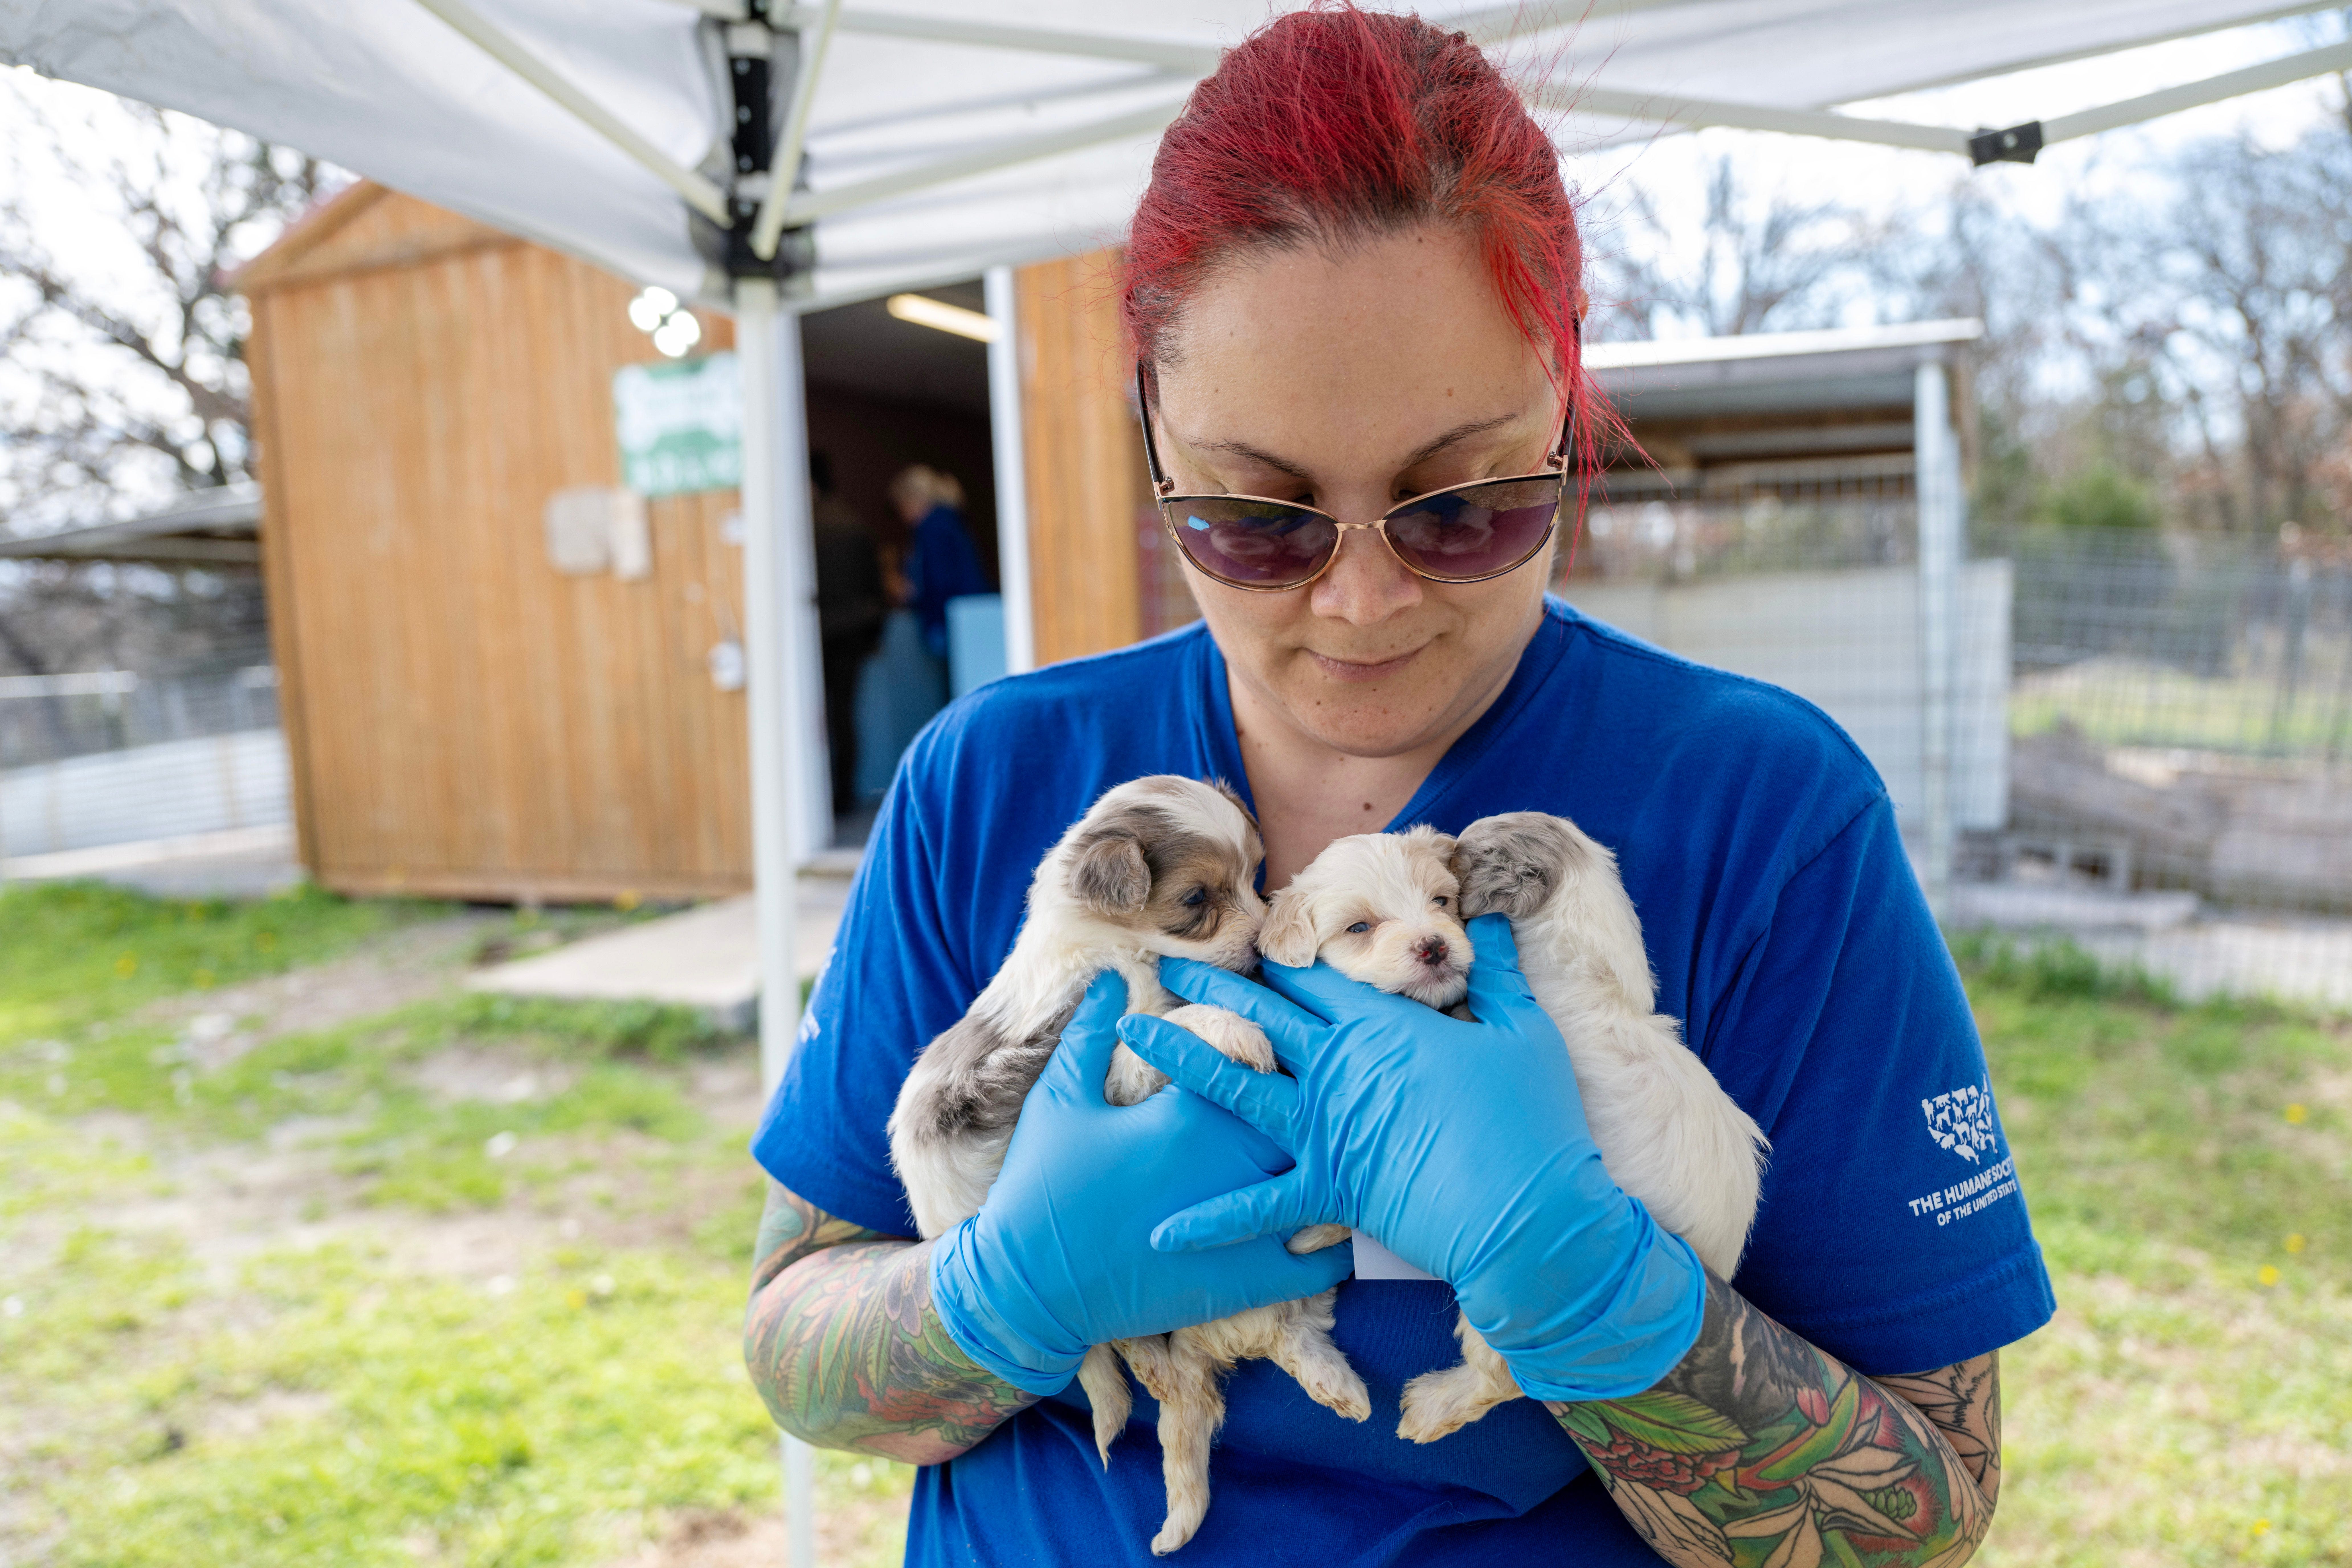 Ohio ranks No. 2 on 'Horrible Hundred' report for puppy mill violations. Here are the breeders